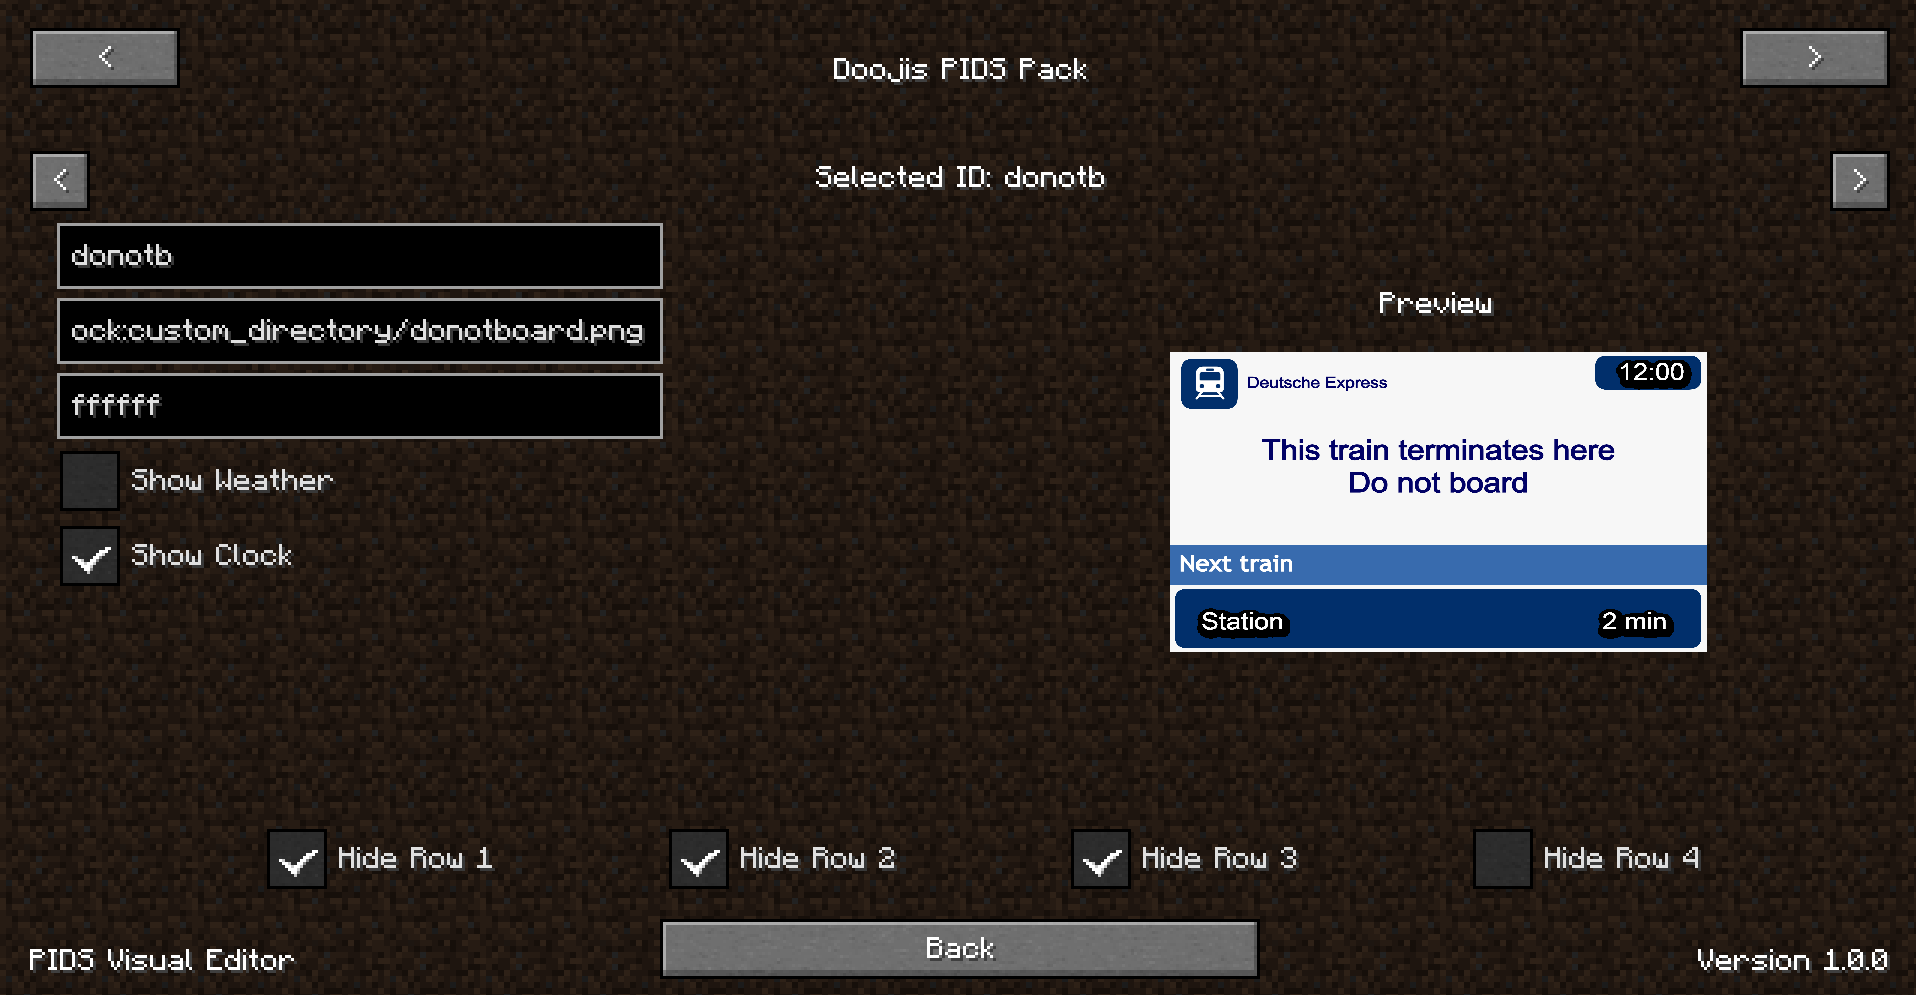 PIDS Visual Editor screen, with a loaded pack.